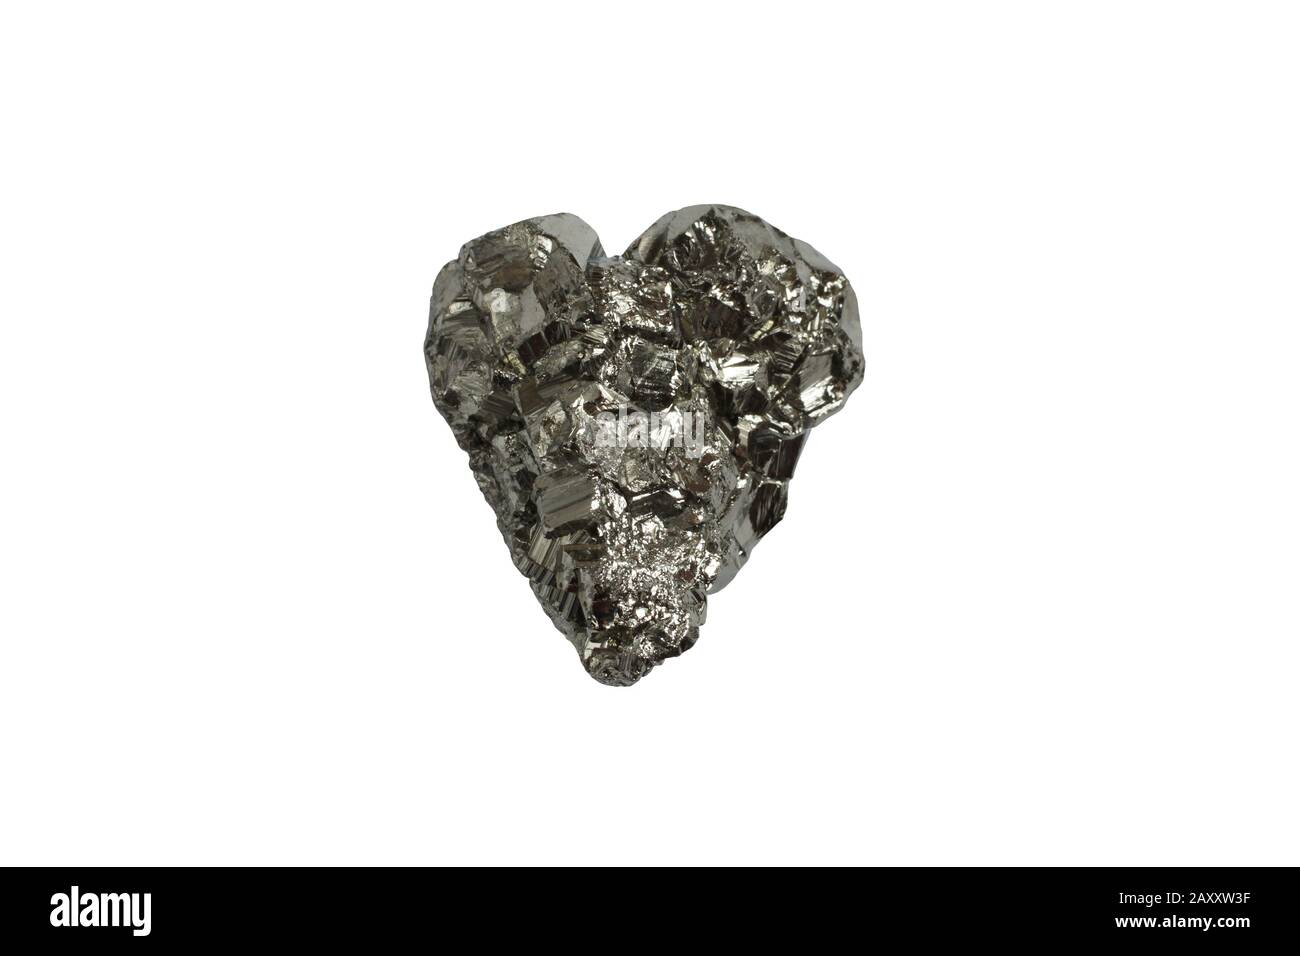 Mineral pyrite in the shape of a heart on a white background Stock Photo